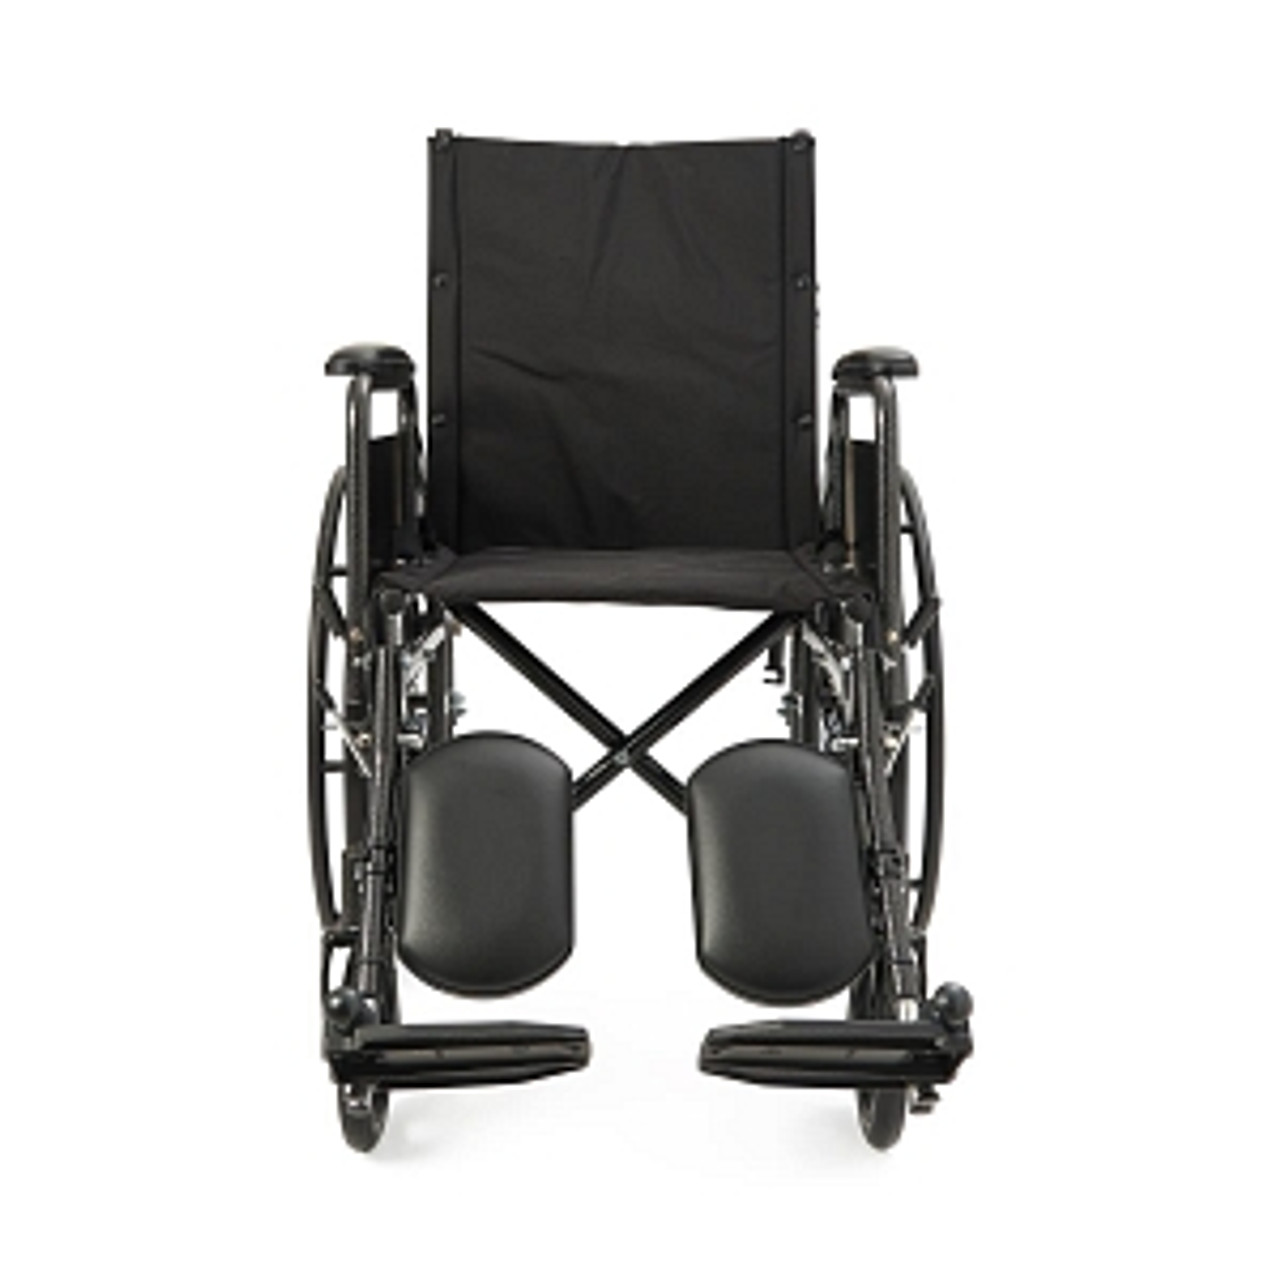 Reclining wheelchair with desk-length arms and elevating leg rests
Nylon construction for easy cleaning
300 lb. weight capacity